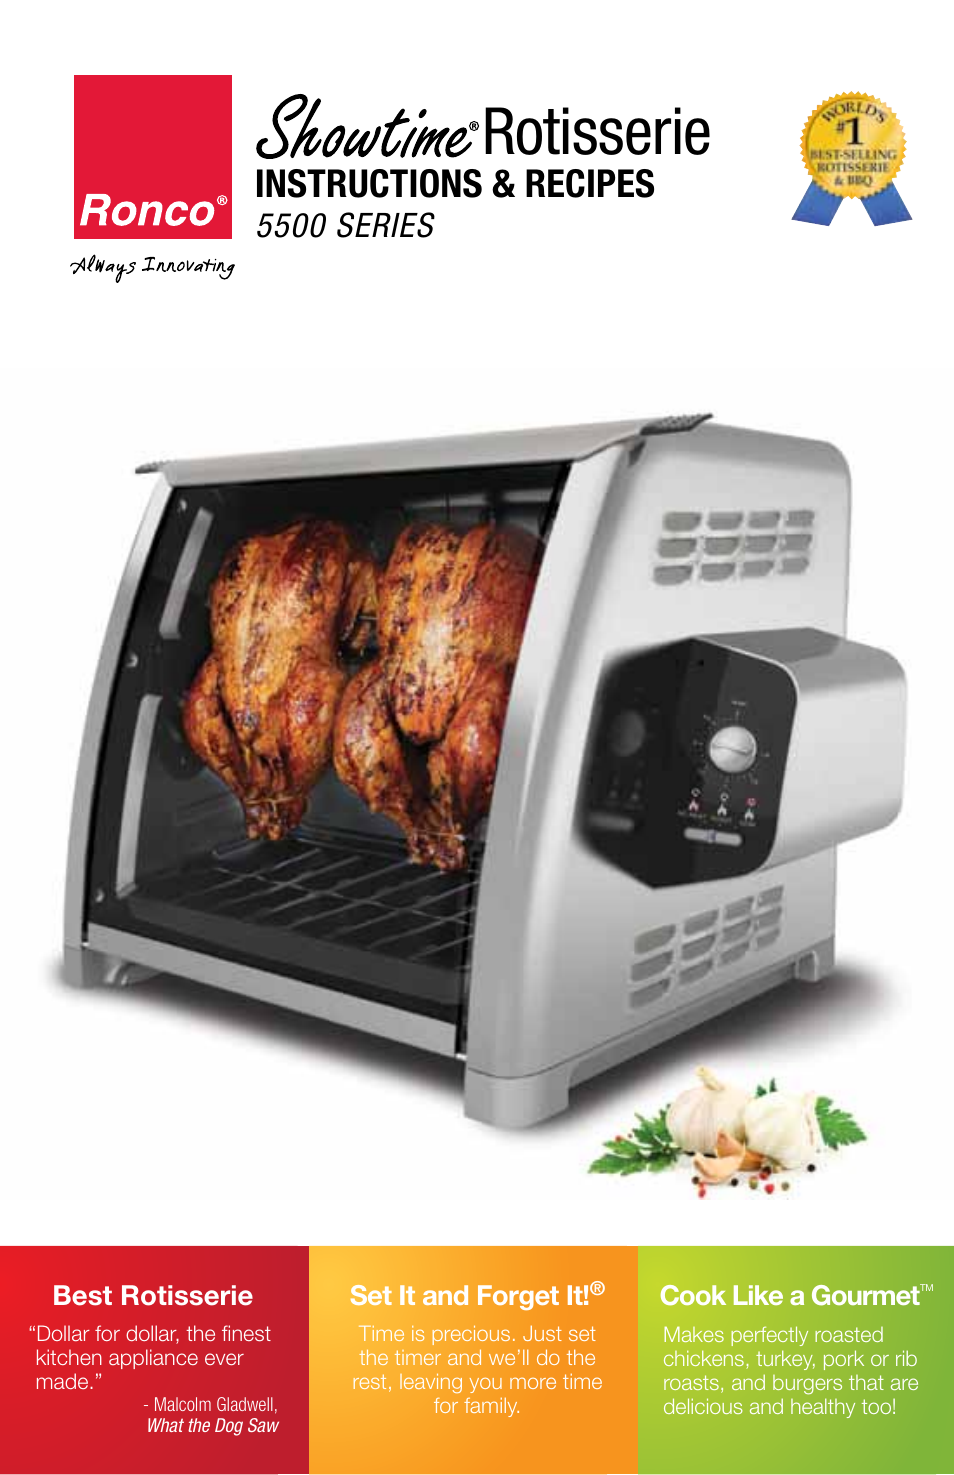 Ronco 5500 Series Stainless Rotisserie Oven User Manual | 32 pages